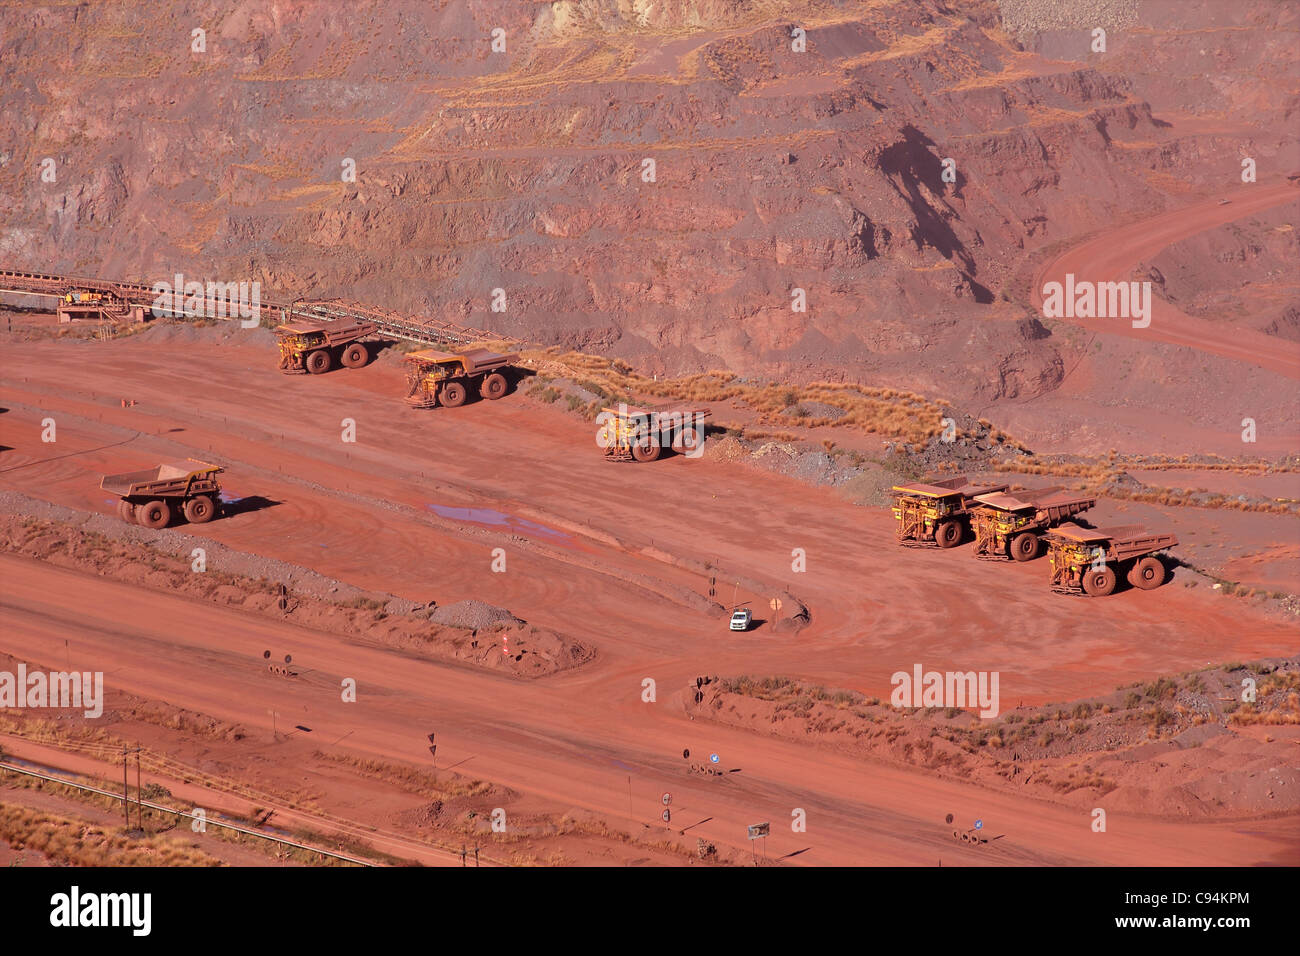 Large, open-pit iron ore mine with trucks Stock Photo